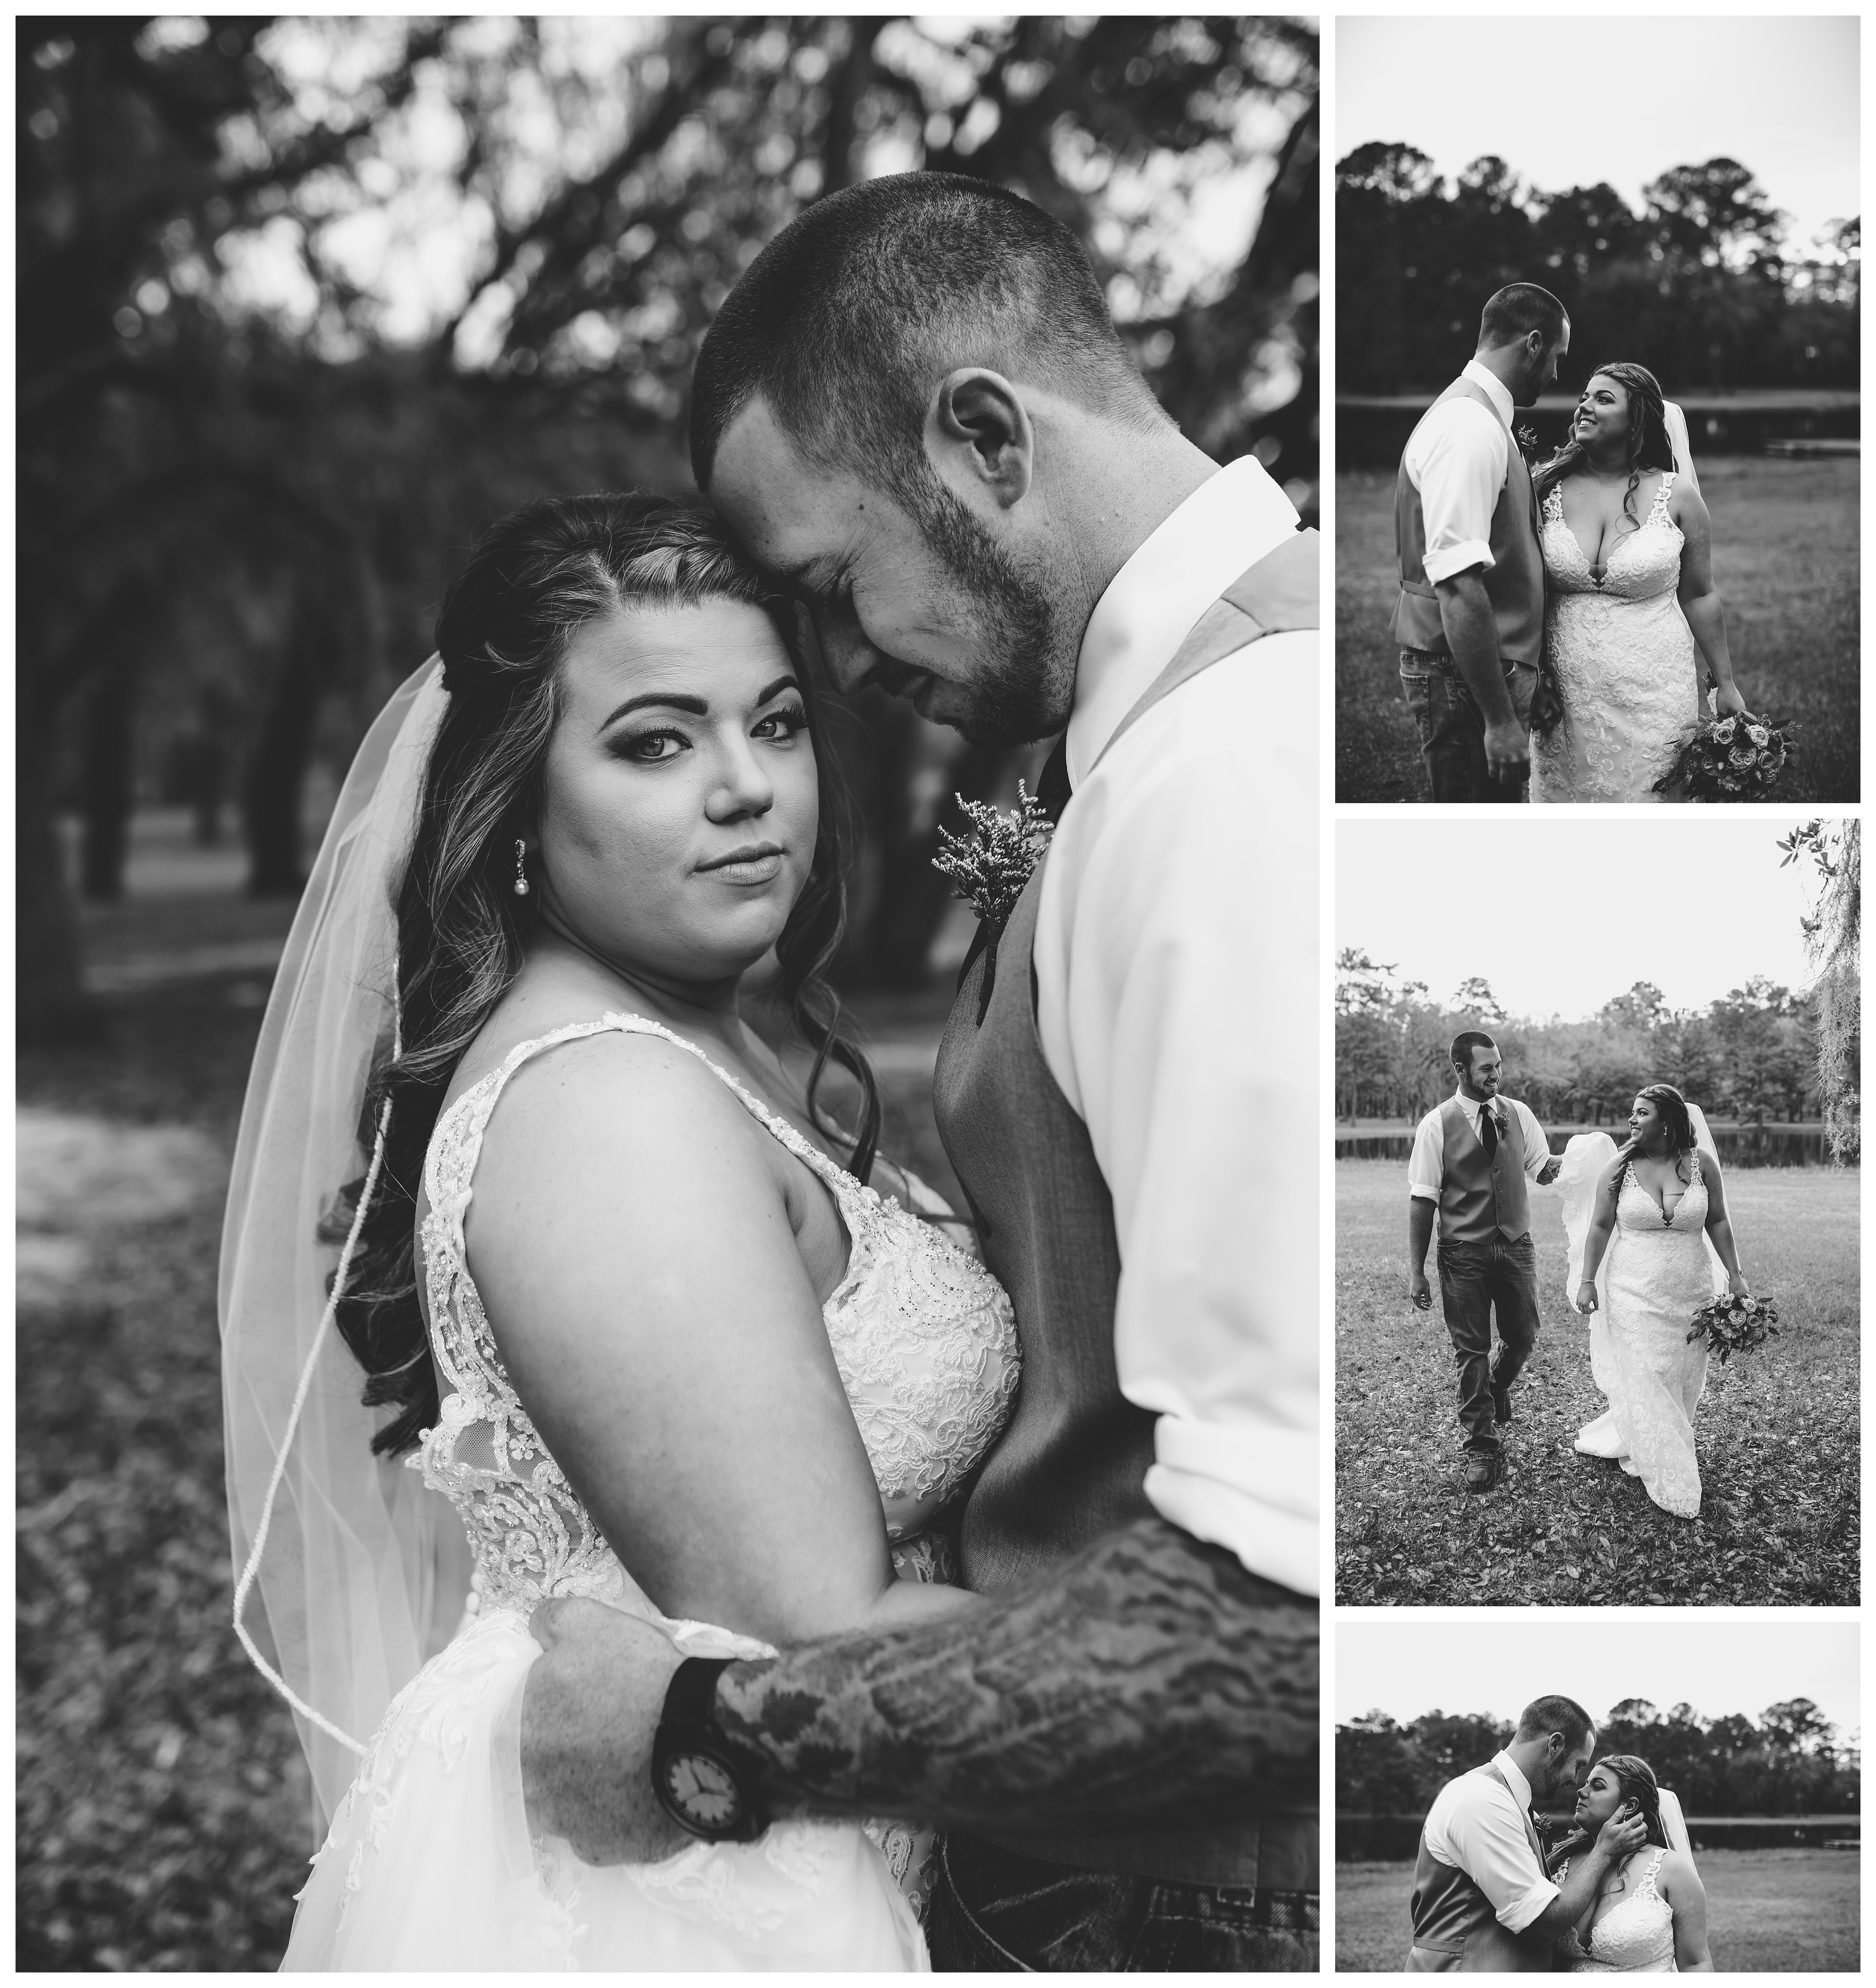 Black and white wedding portraits of bride and groom by documentary style photographer in Tallahassee, FL. Shelly Williams Photography